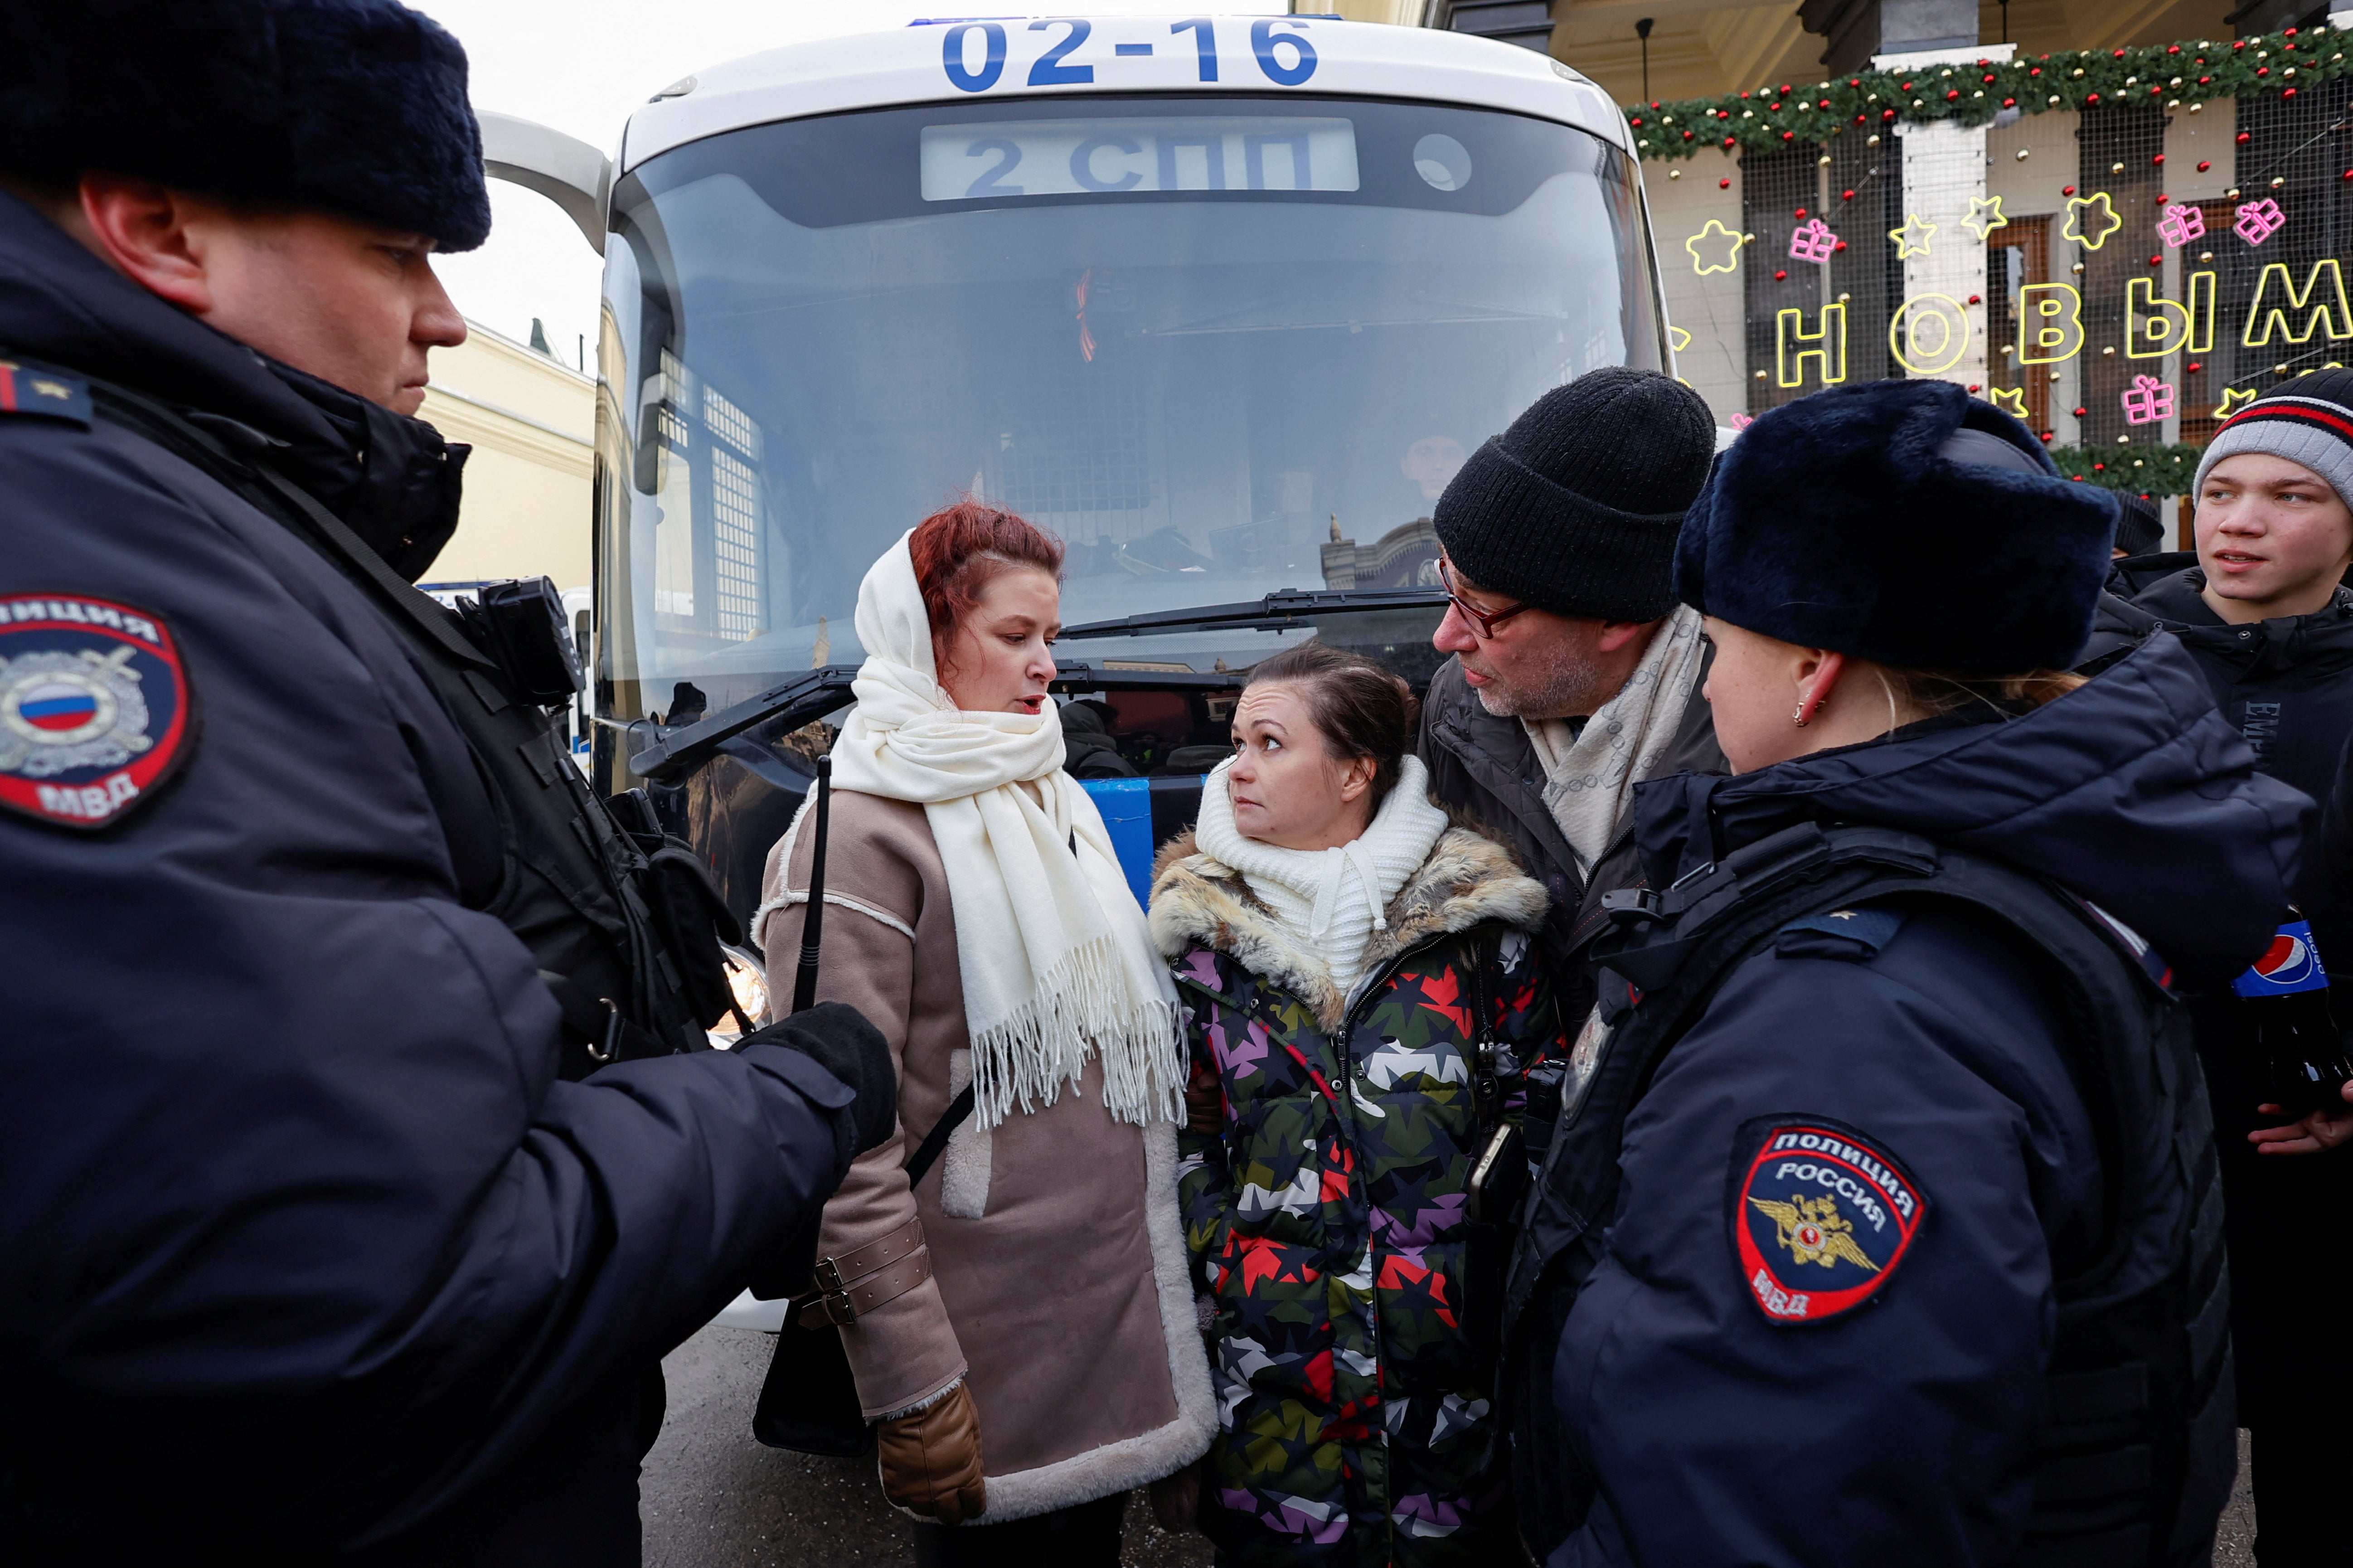 Protesters were pictured surrounded by police officers during the gathering in central Moscow